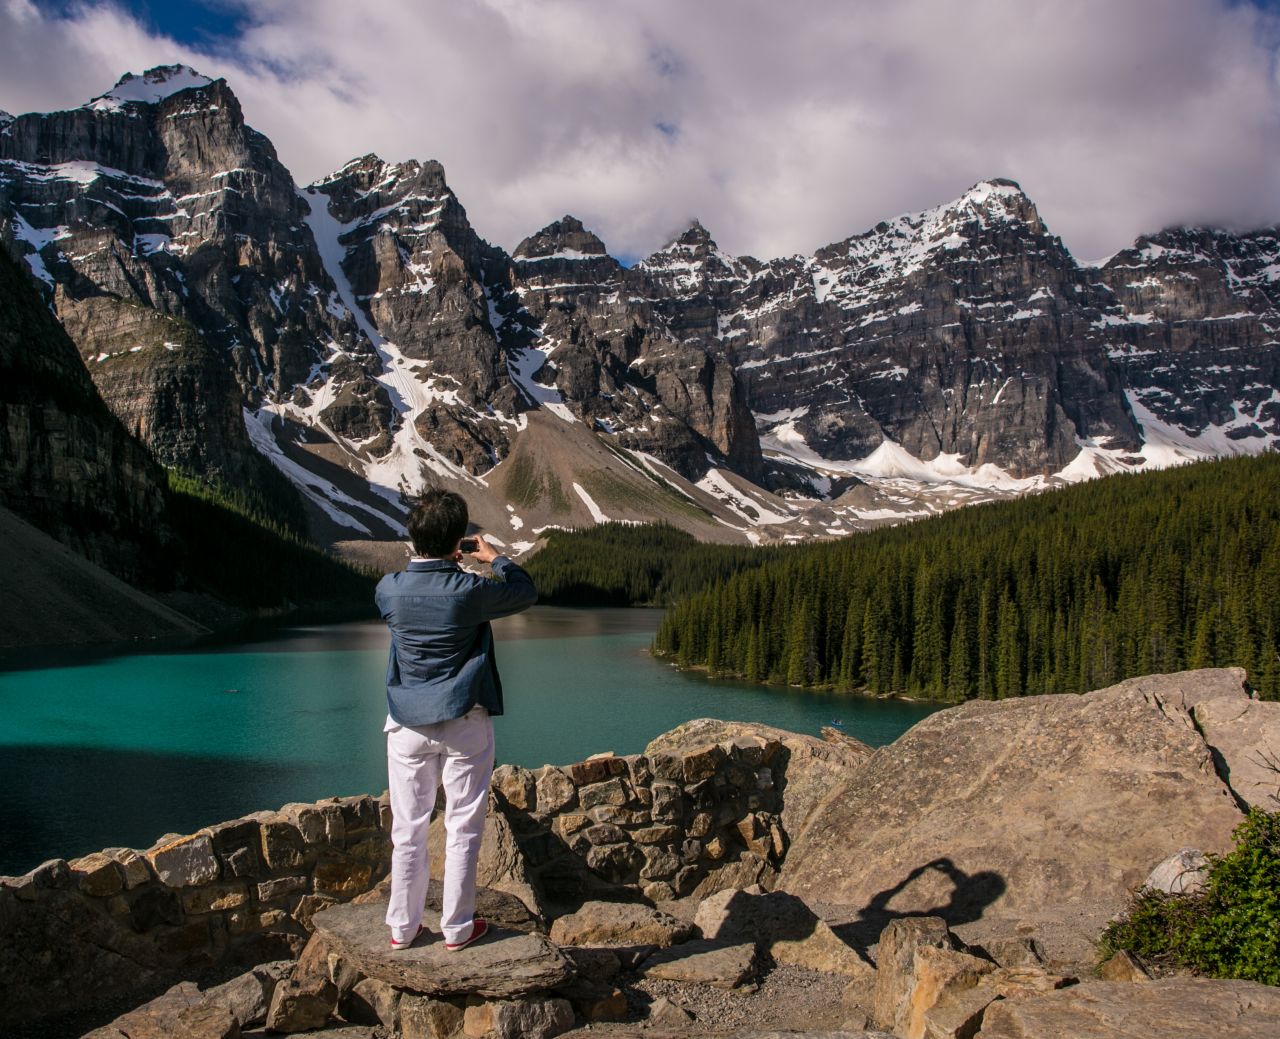 <strong>Canada</strong> is the sixth-happiest country in the world. <a href="http://www.pc.gc.ca/eng/pn-np/ab/banff/index.aspx" target="_blank" target="_blank">Banff National Park</a> may be one of the reasons why. Canada's oldest national park spans more than 2,500 square miles of mountains, glaciers, forests and lakes in Alberta.